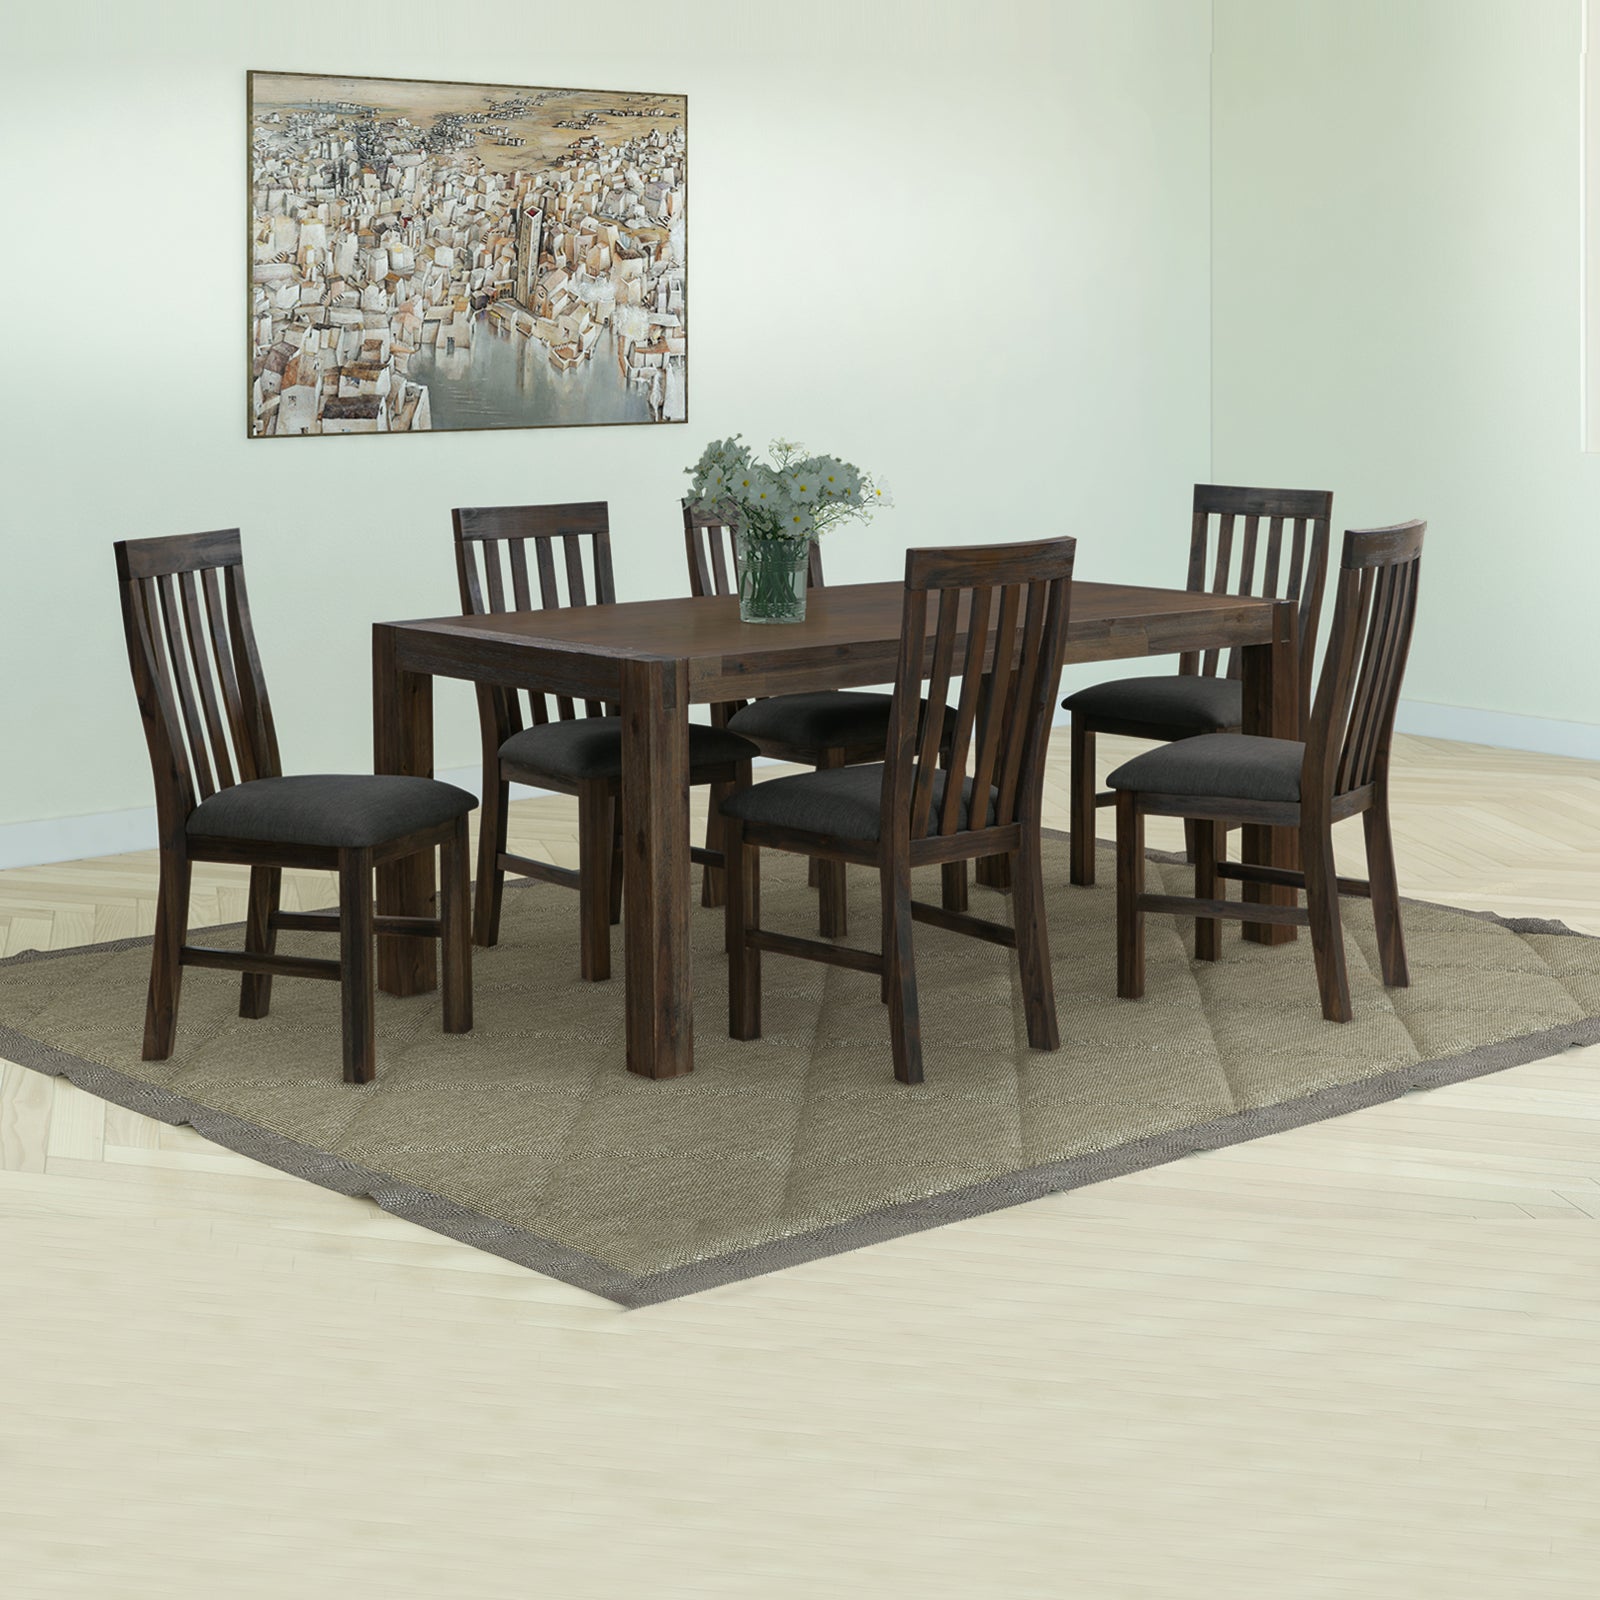 7 Pieces Dining Suite 180cm Medium Size Dining Table & 6X Chairs with Solid Acacia Wooden Base in Chocolate Colour - SILBERSHELL